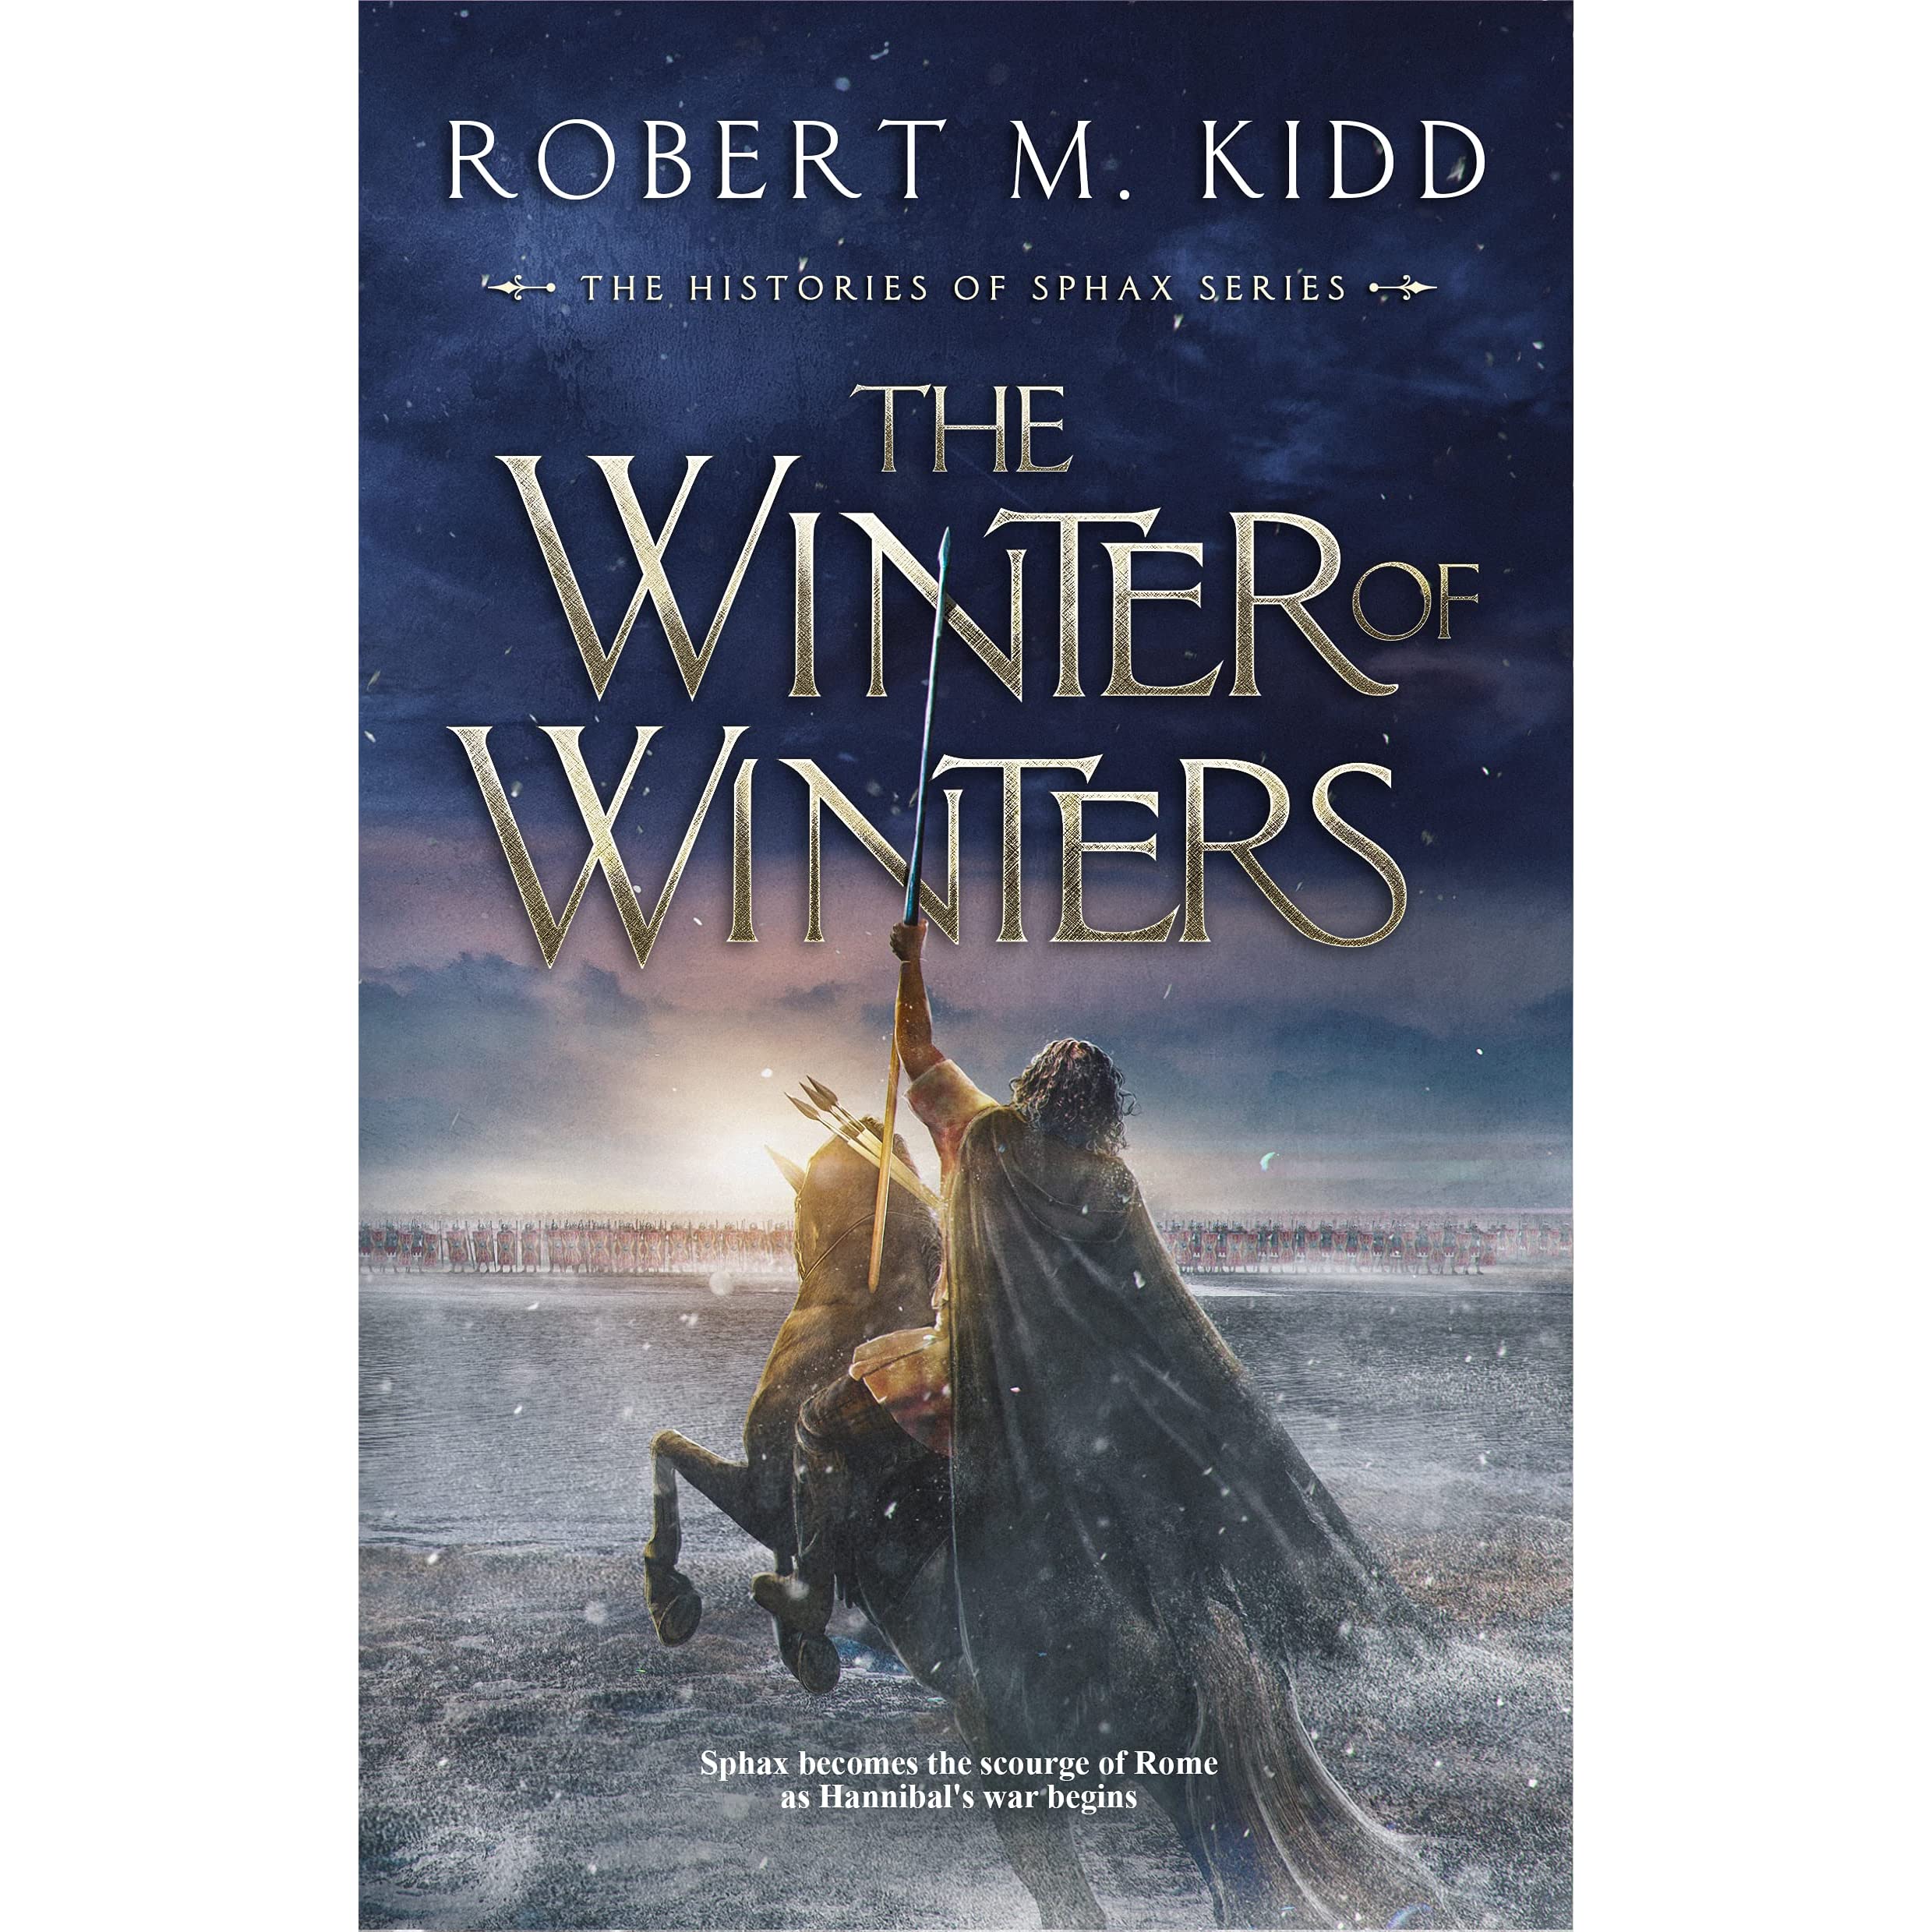 The Winter of Winters: Sphax becomes the scourge of Rome as Hannibal's war  begins by Robert M. Kidd